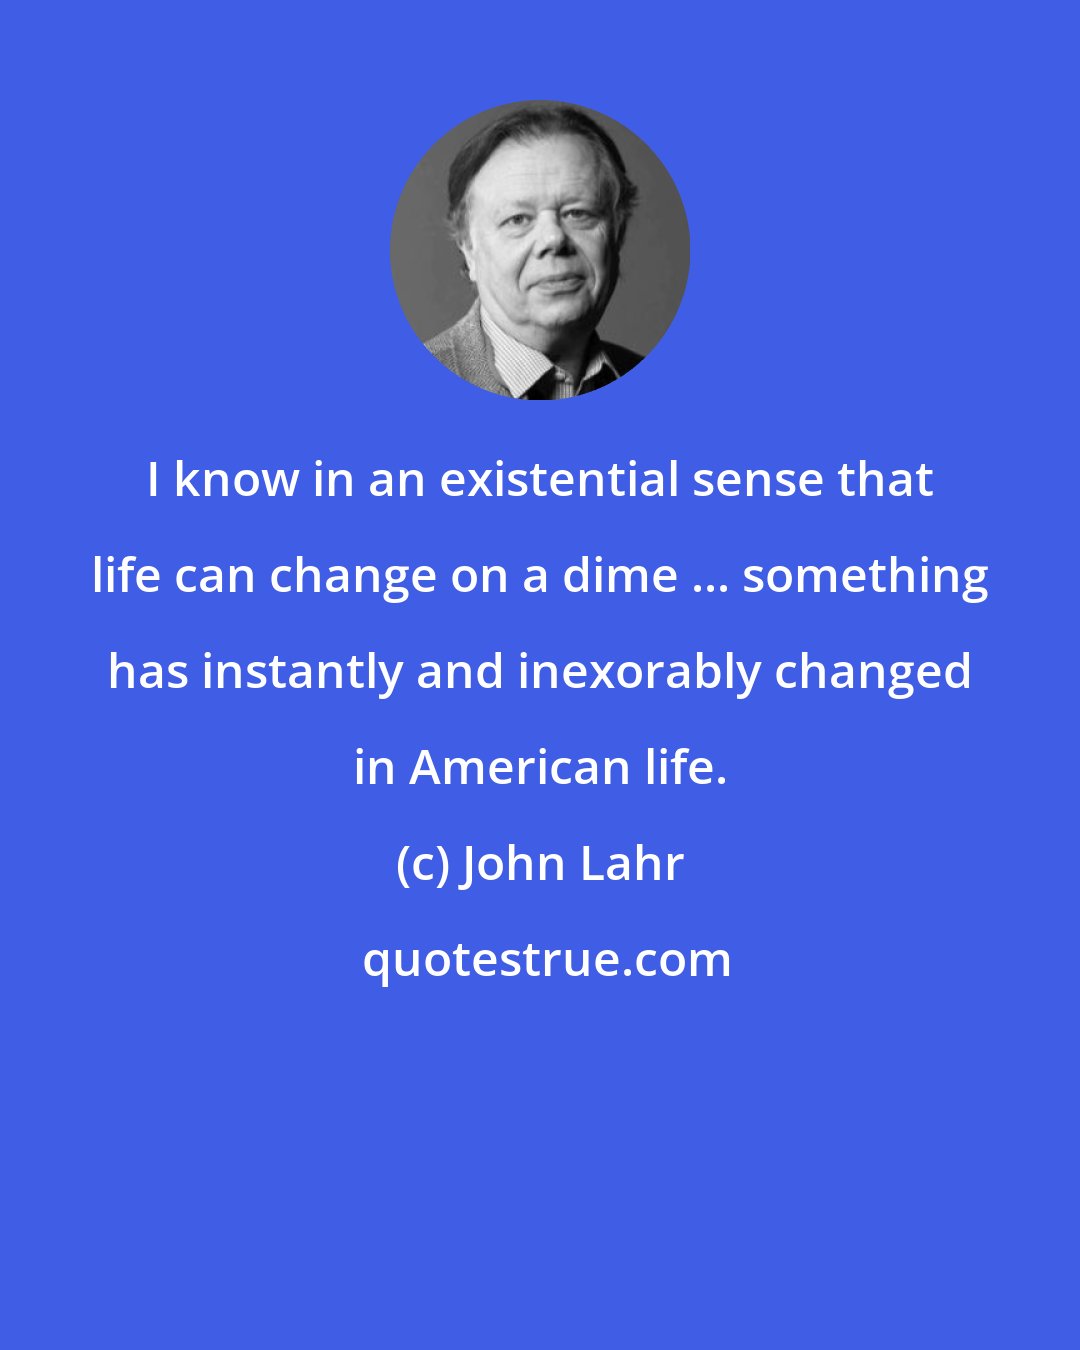 John Lahr: I know in an existential sense that life can change on a dime ... something has instantly and inexorably changed in American life.